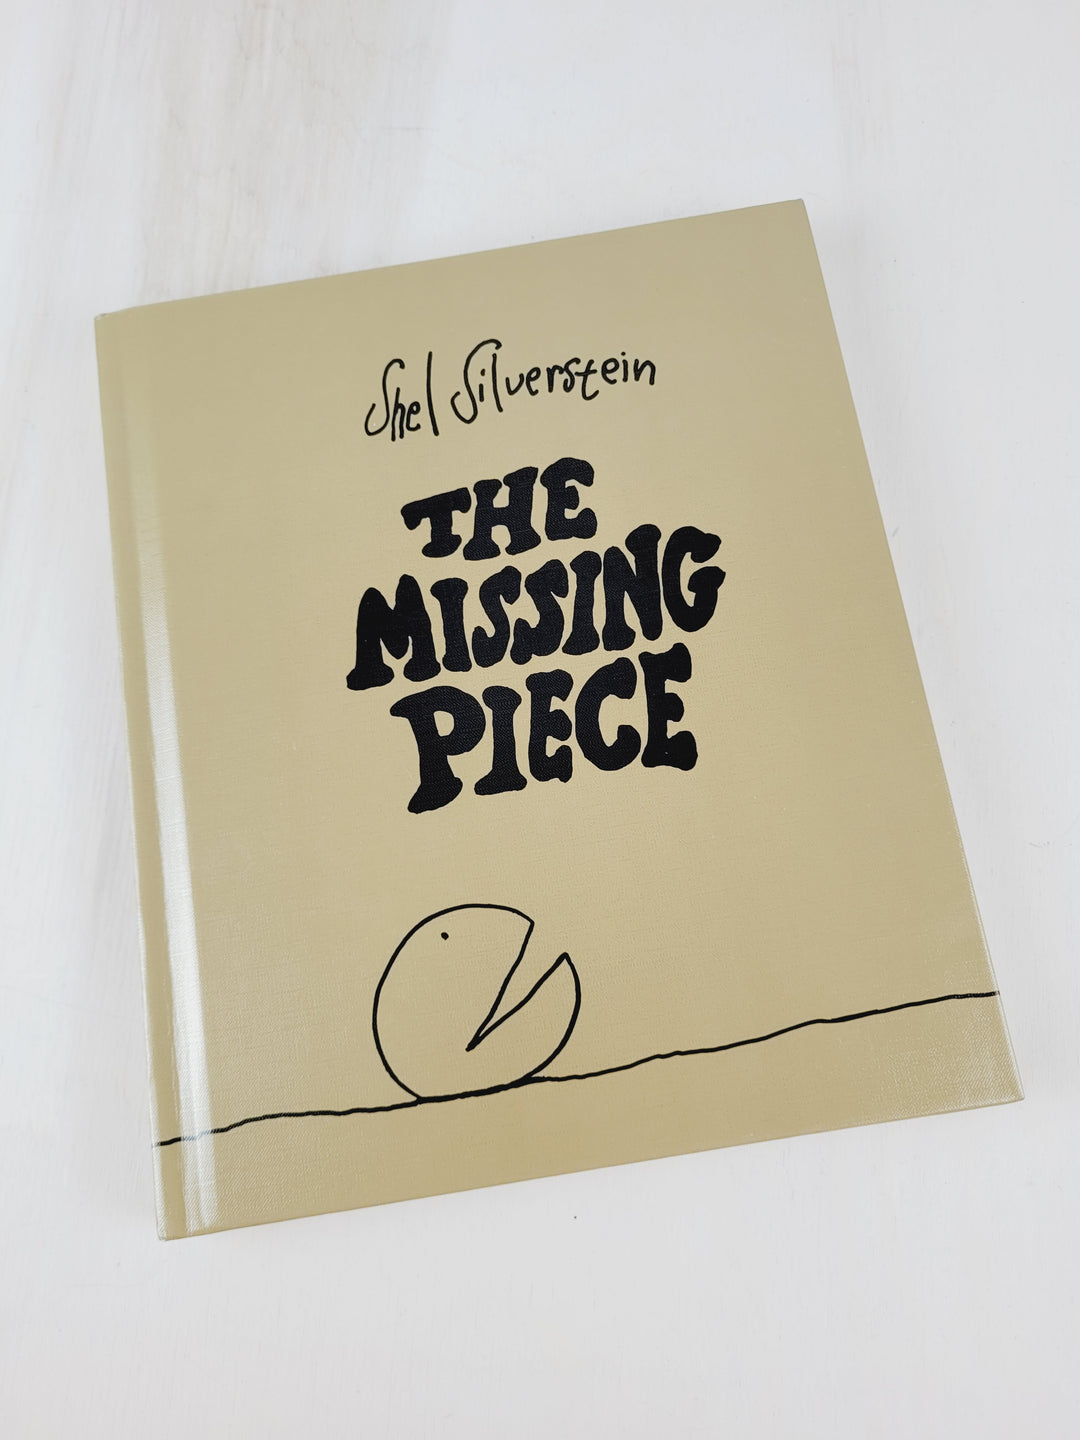 SHEL SILVERSTEIN THE MISSING PIECE HARDCOVER BOOK EUC